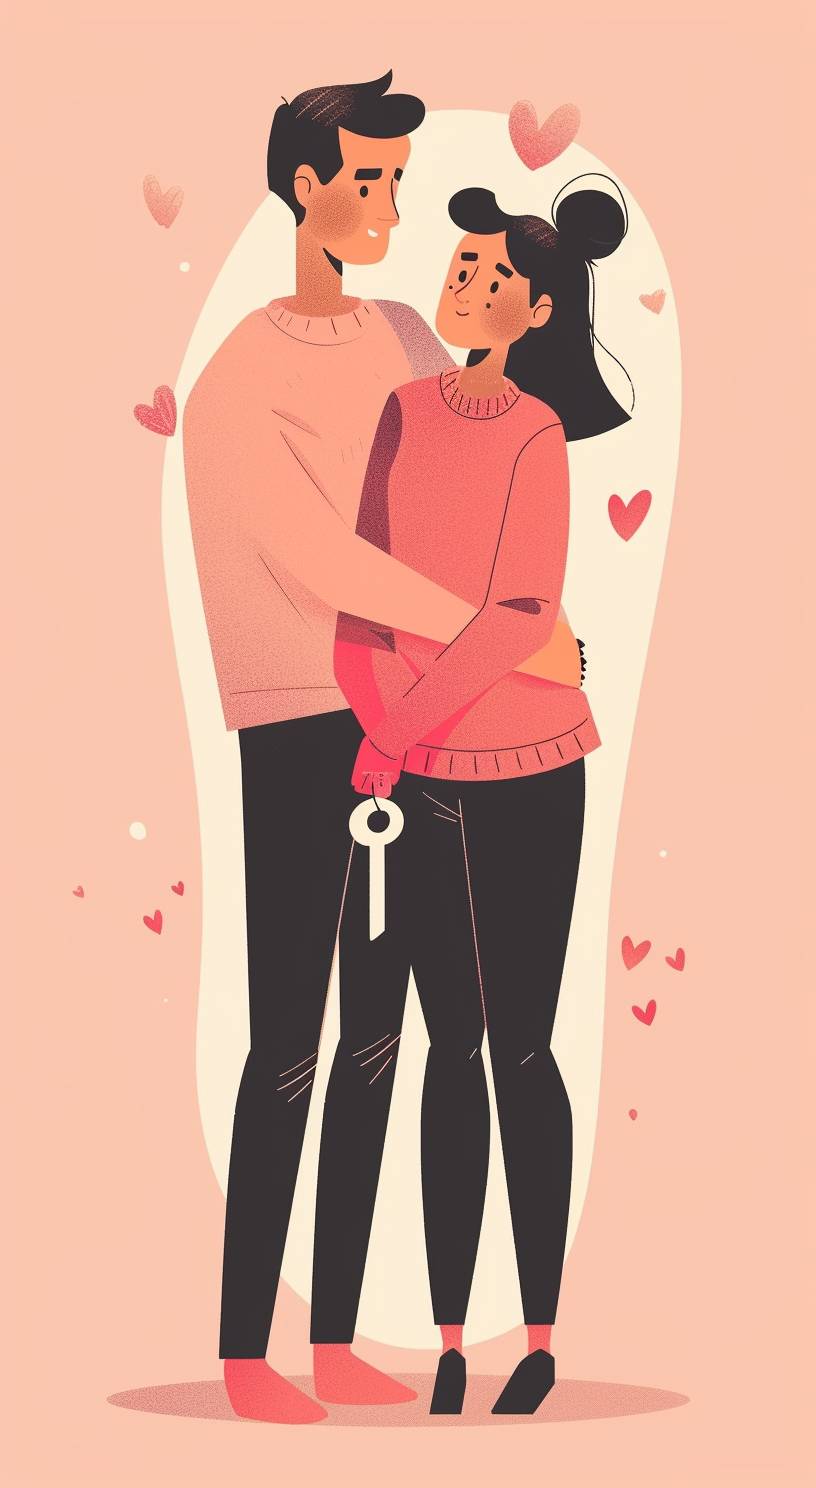 Happy couple holding big house key together, lateral view, looking at something, full body, flat illustration style, simple background, vector illustration, pink skin tone, flat design illustration, minimalism, simple color scheme, flat colors, simple shapes, flat gray gradient